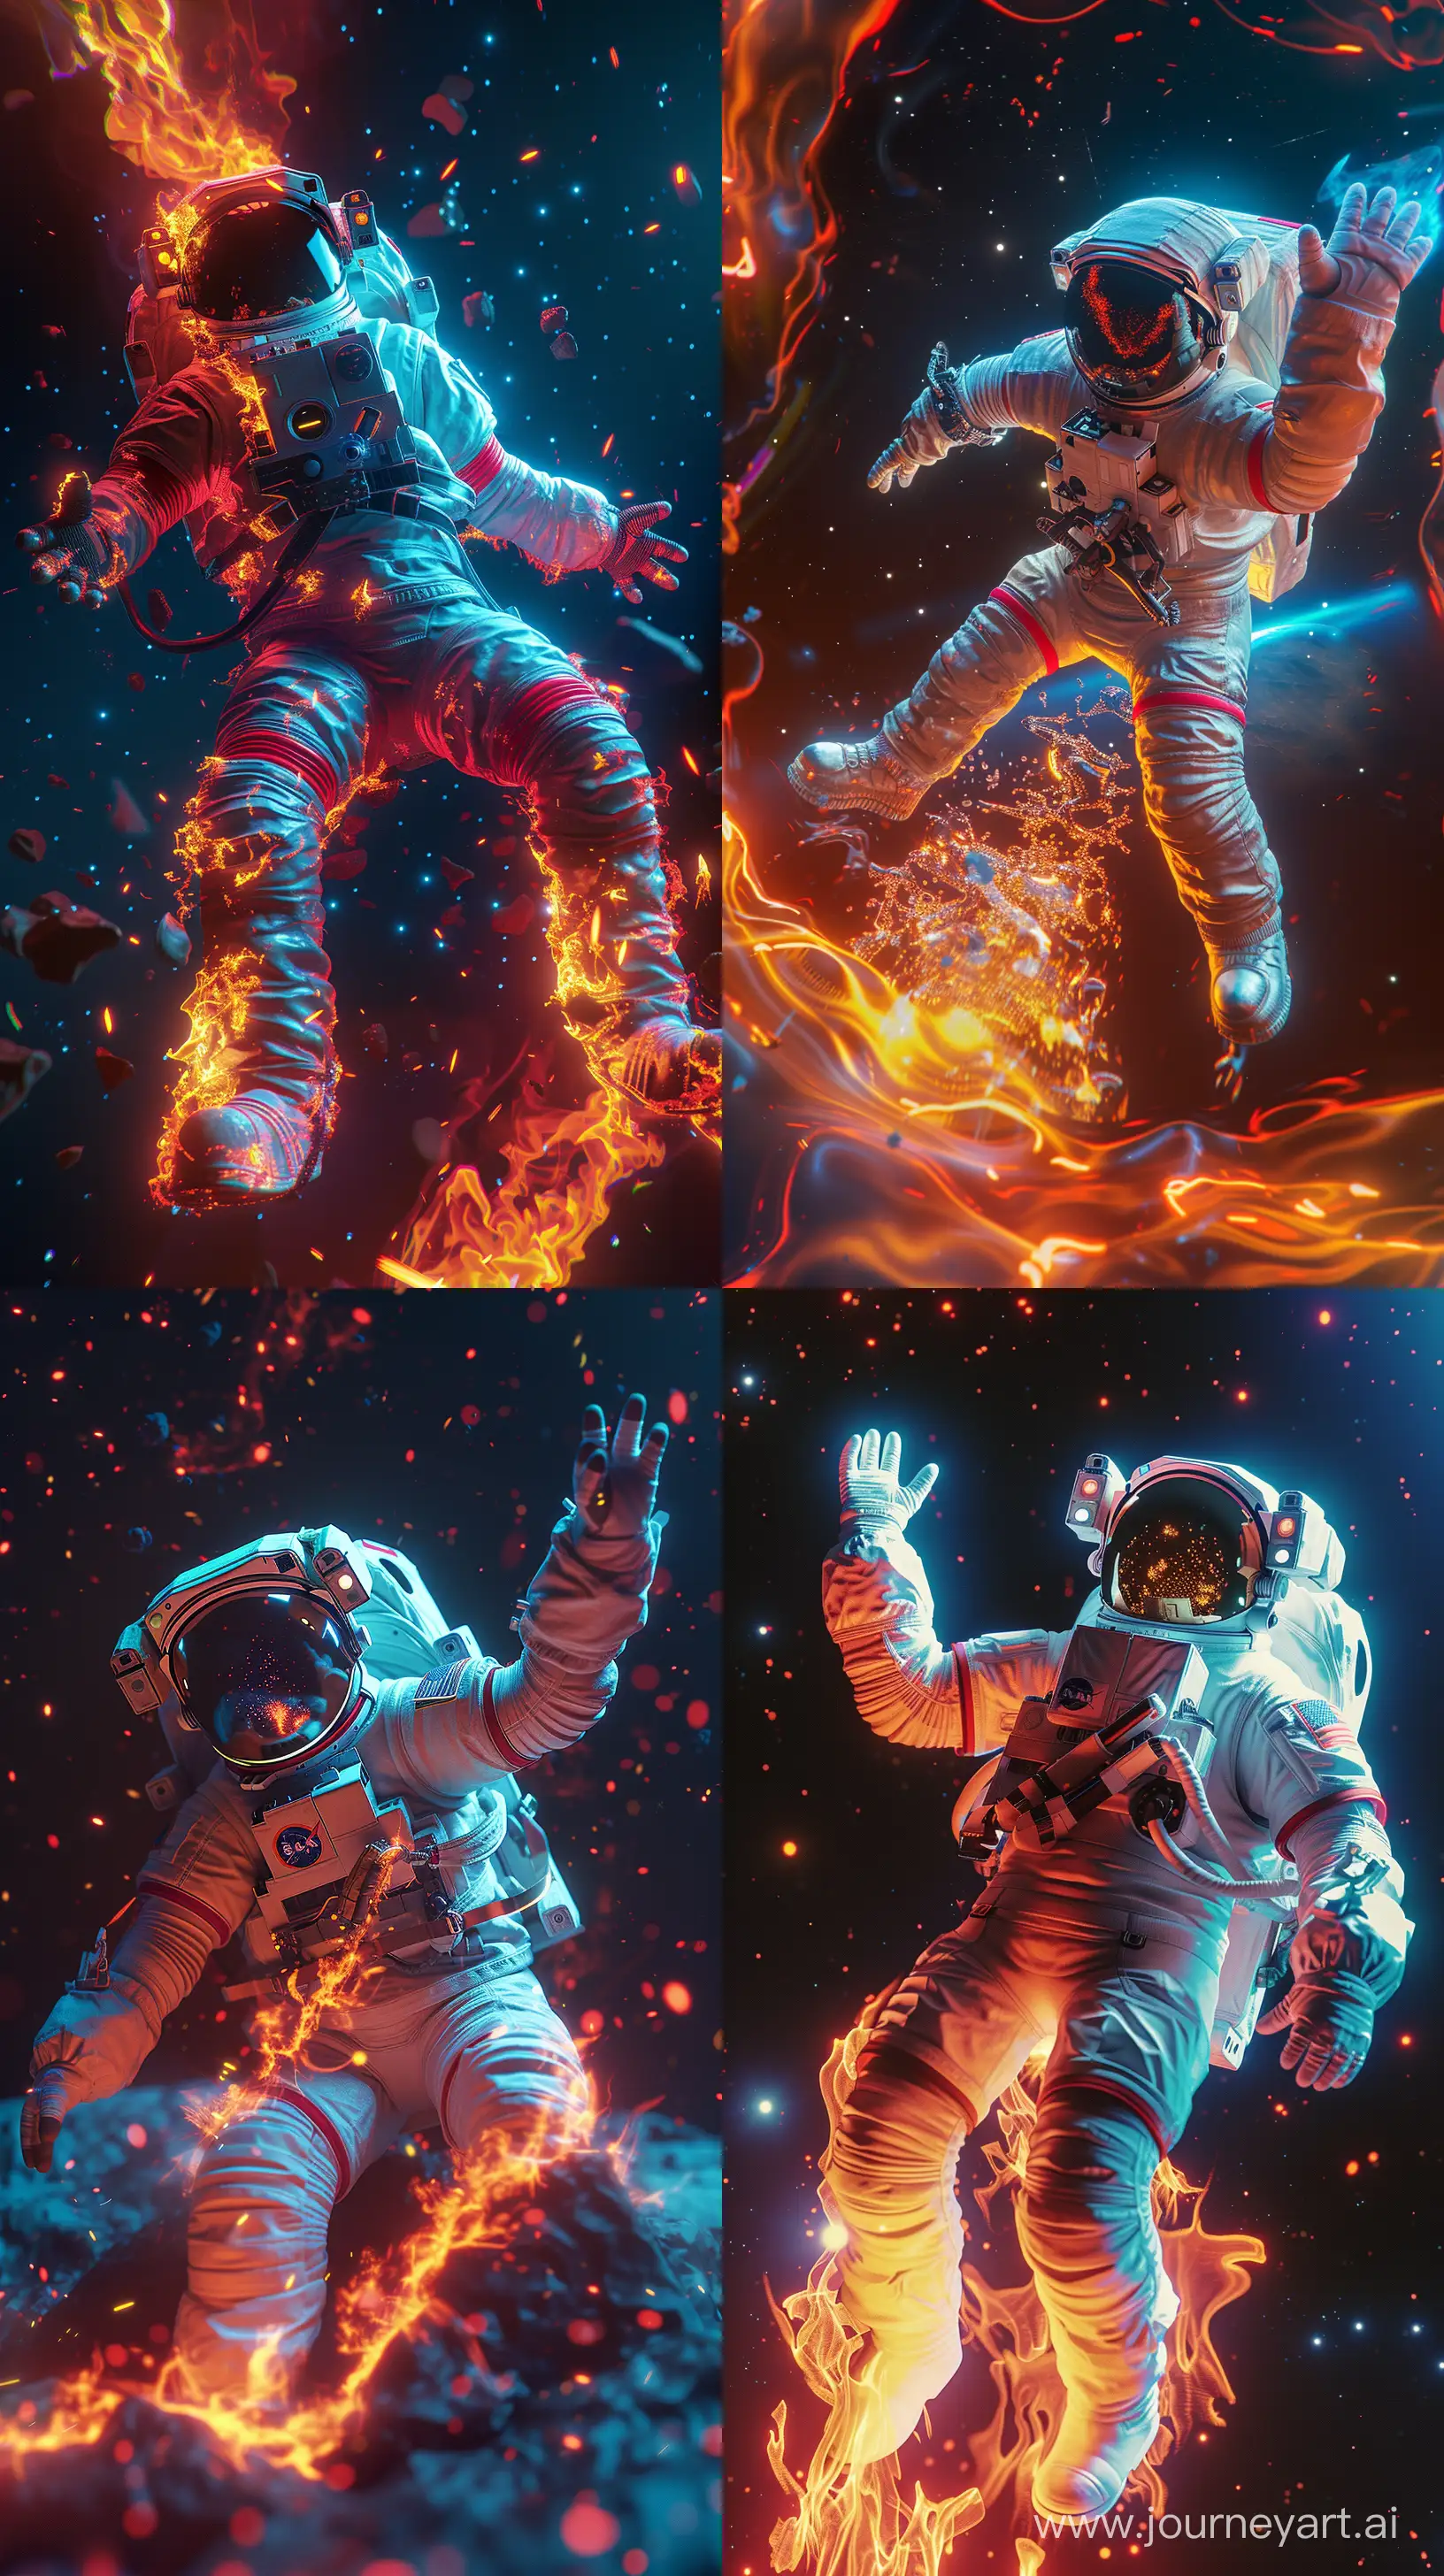 Intense-Astronaut-Sinking-in-Flames-Struggling-to-Ascend